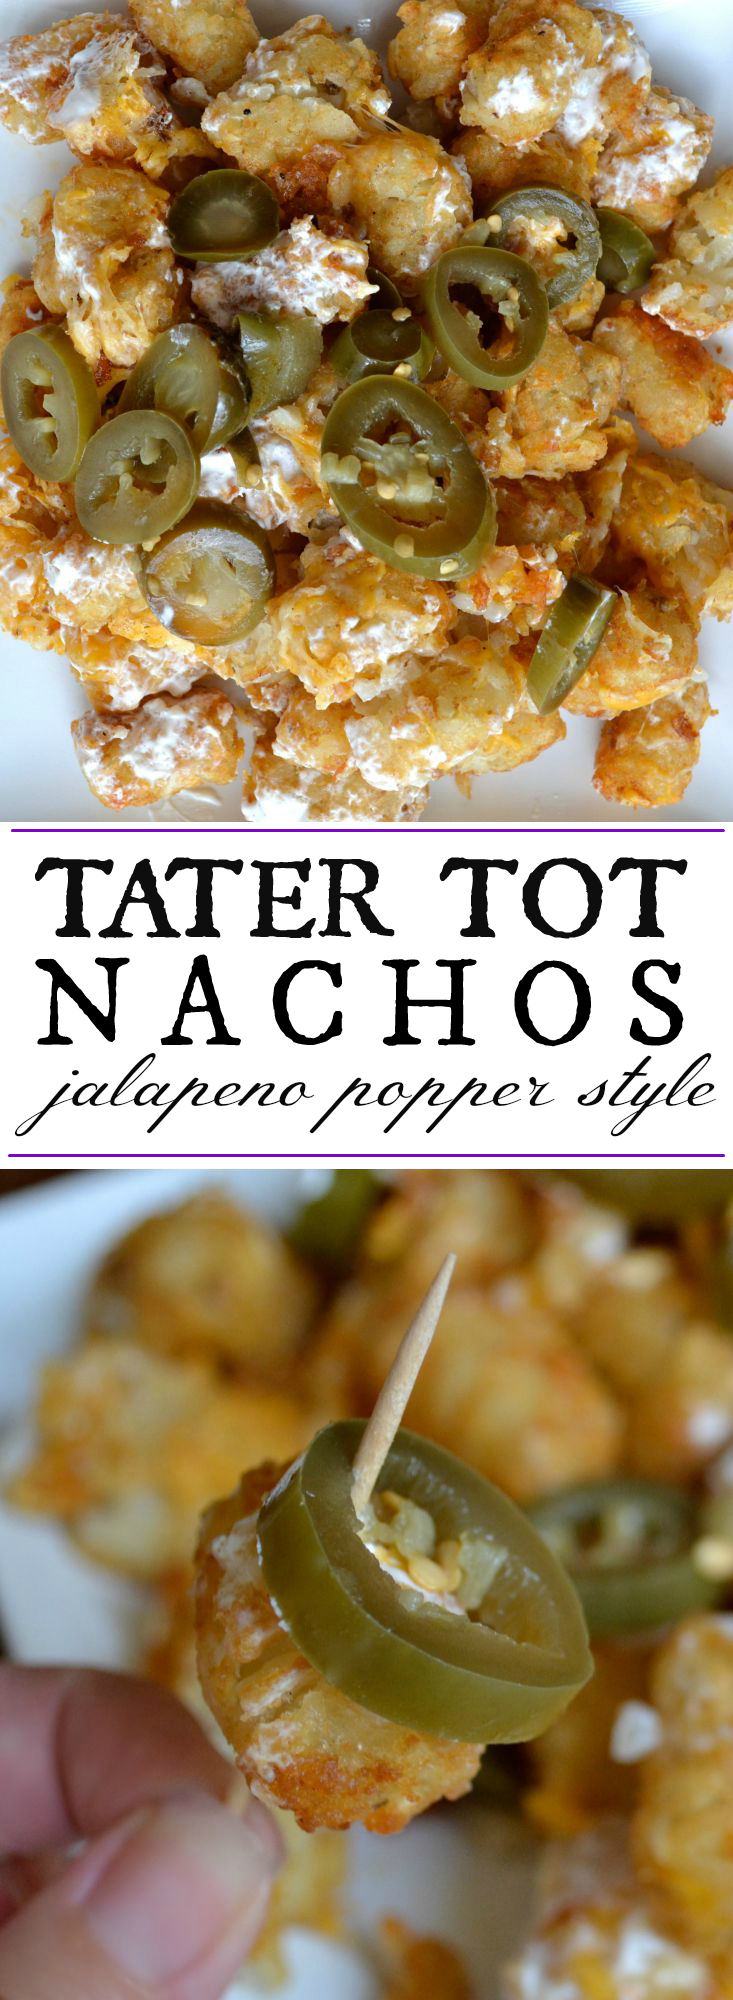 Jalapeno-popper style nachos made with tater tots. YUM!